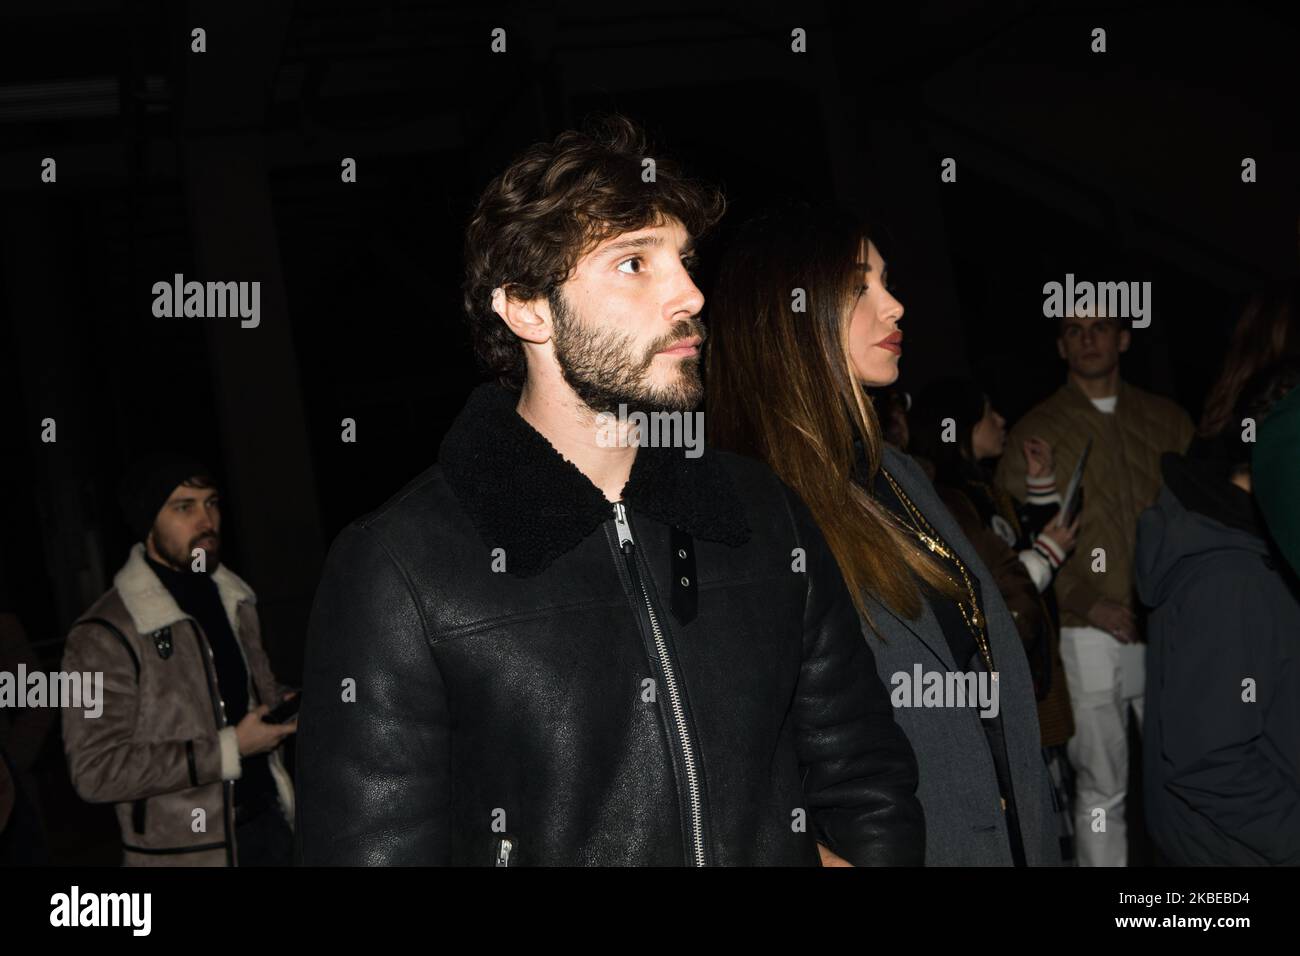 Stefano De Martino (L) and Belen Rodriguez (R) arrivals at Marcelo Burlon County of Milan fashion show during the Milan Fashion Week 2020 in Milan, Italy, on January 11 2020 (Photo by Mairo Cinquetti/NurPhoto) Stock Photo